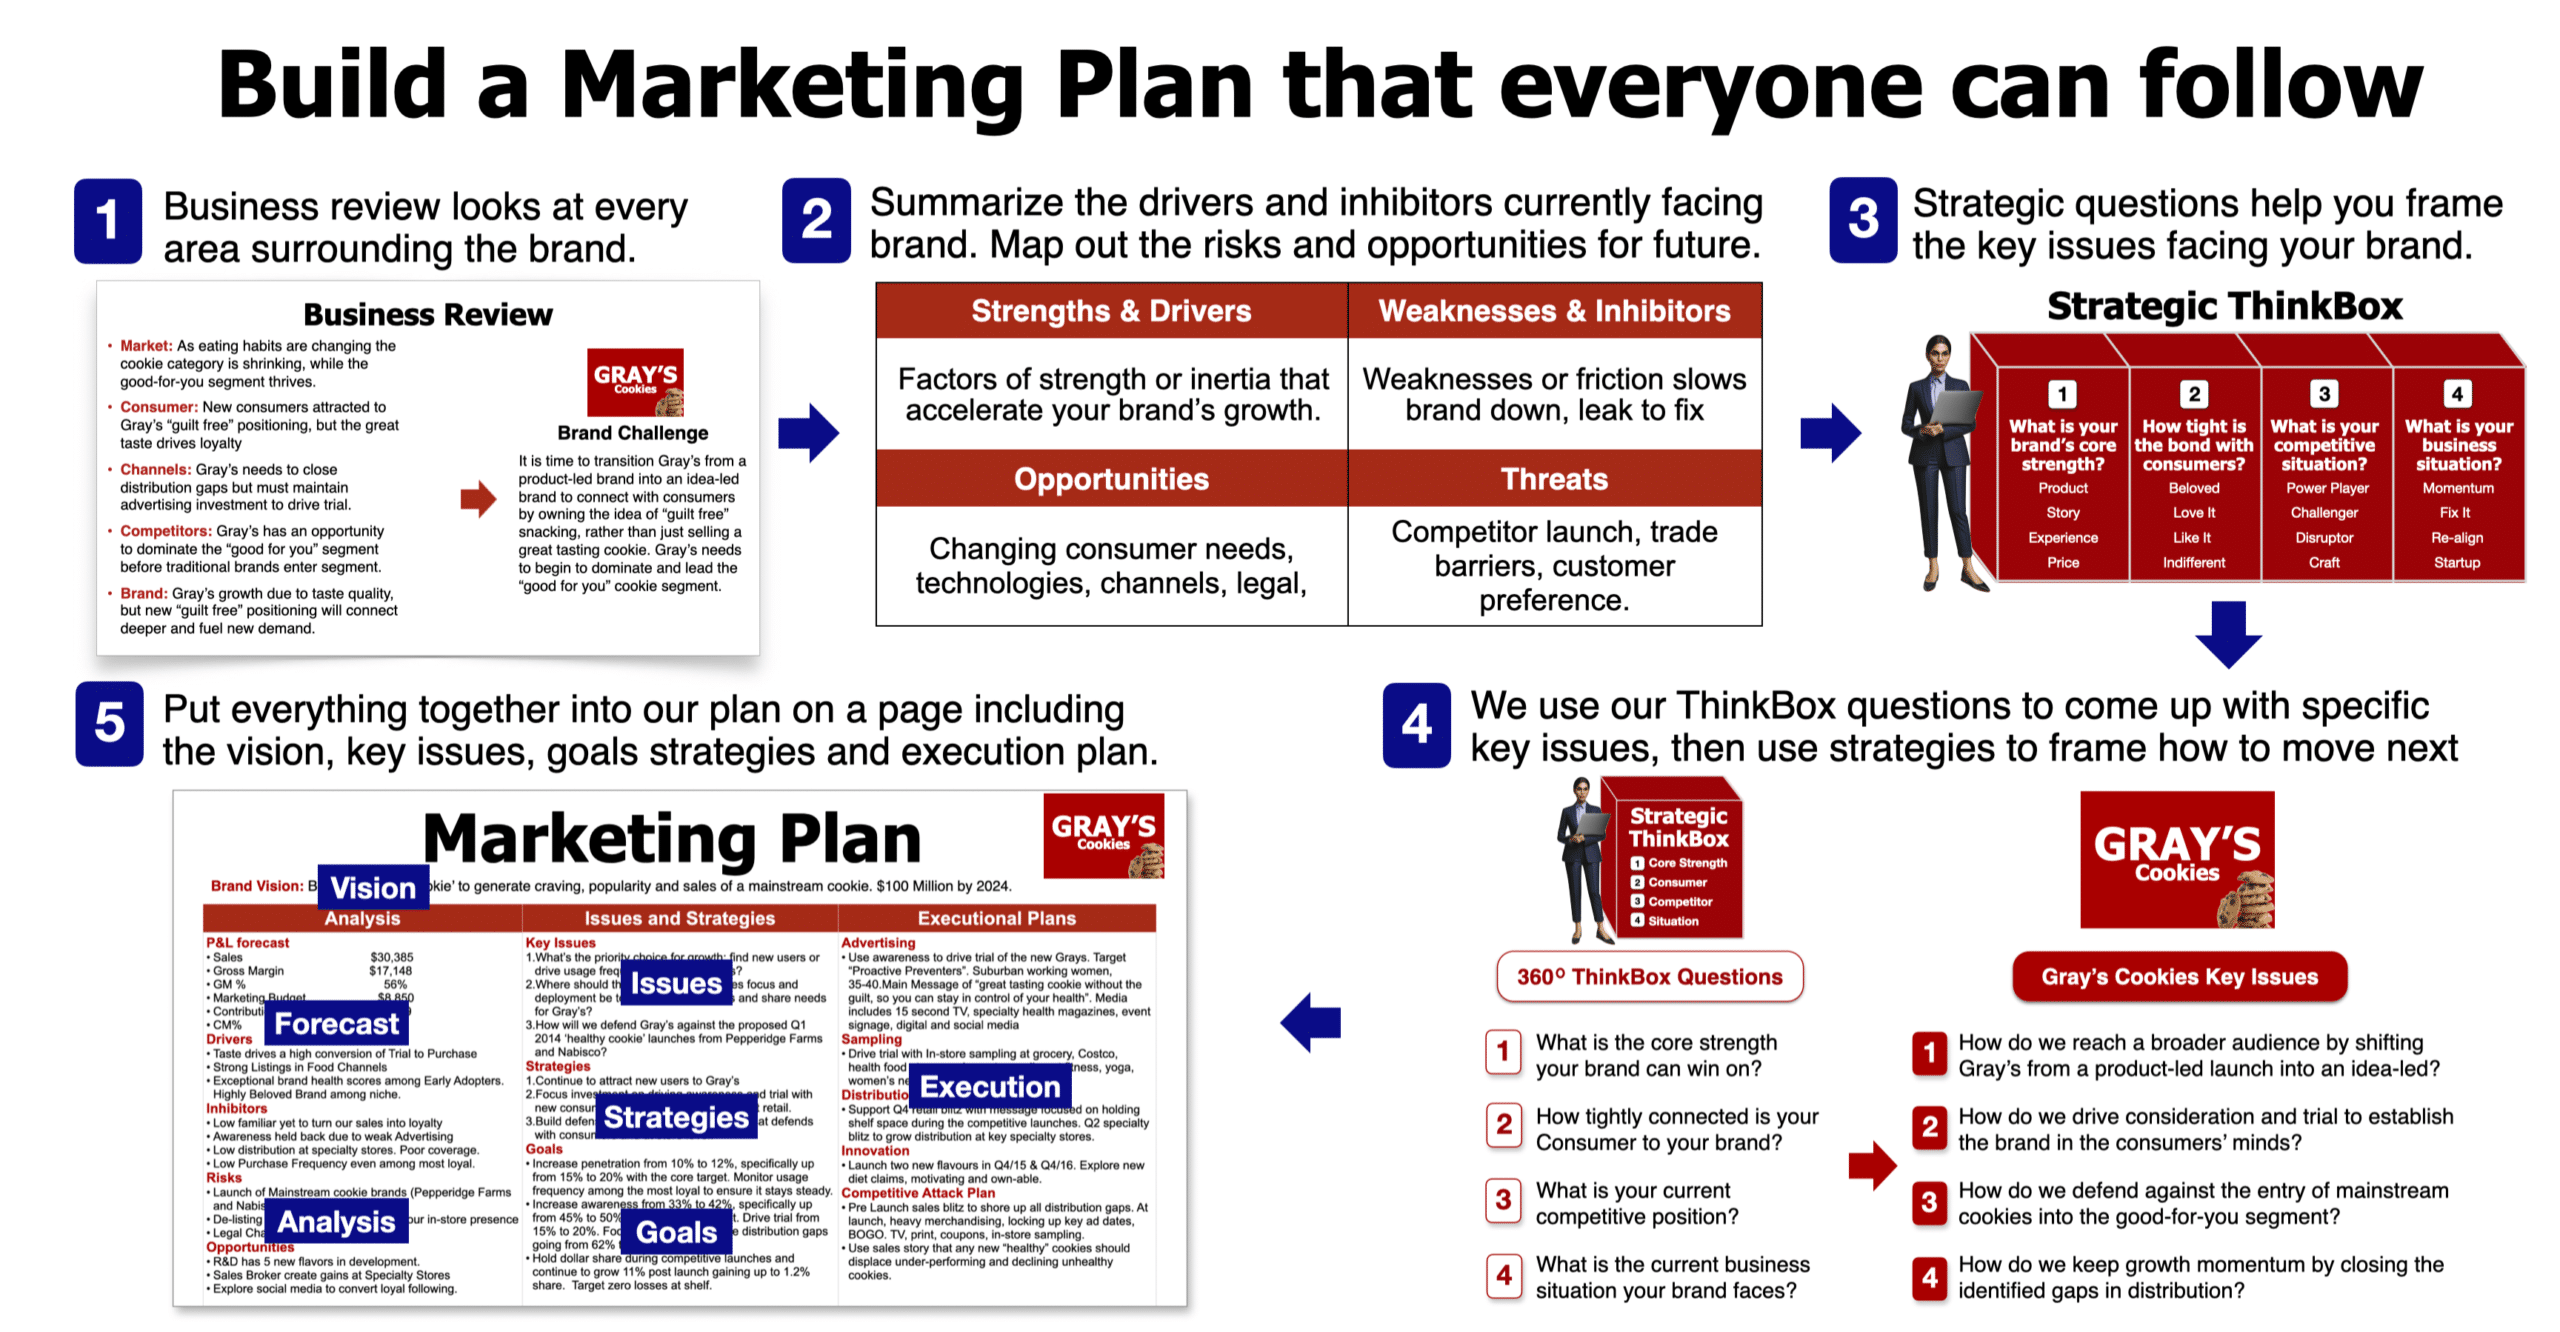 How to build a Marketing plan